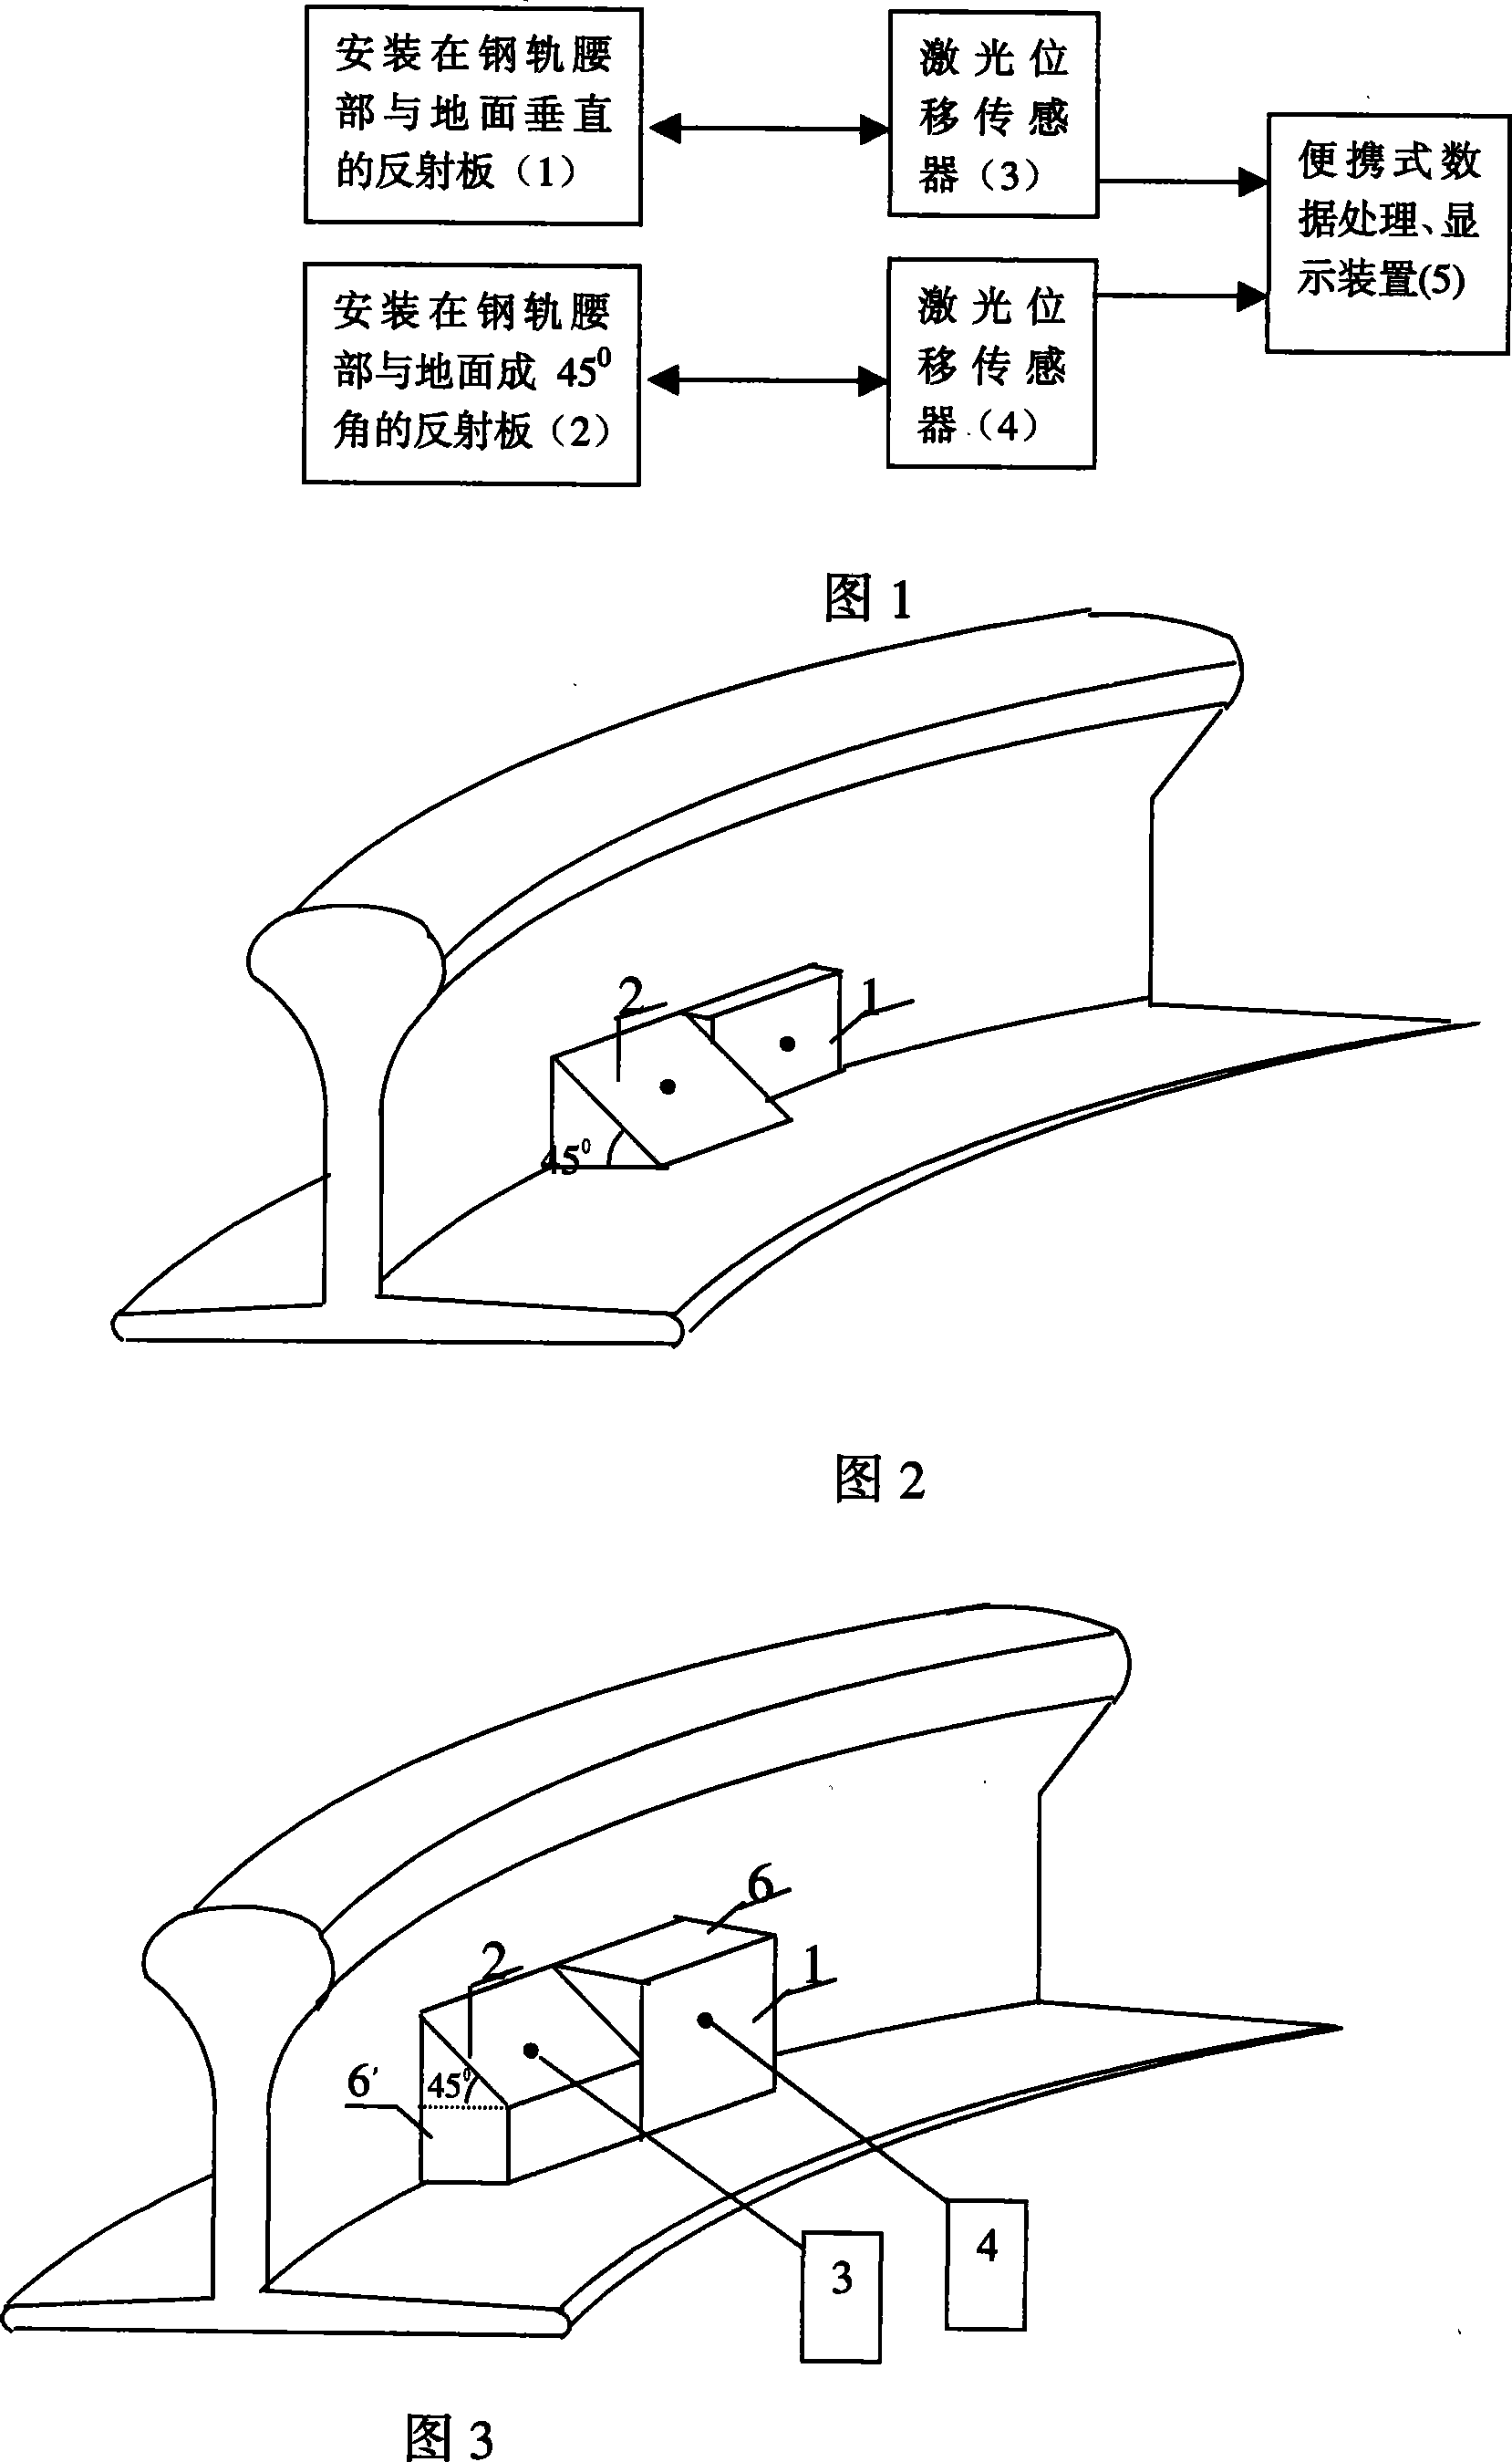 Transverse and vertical dynamic displacement measuring device of high-speed railway track circuit